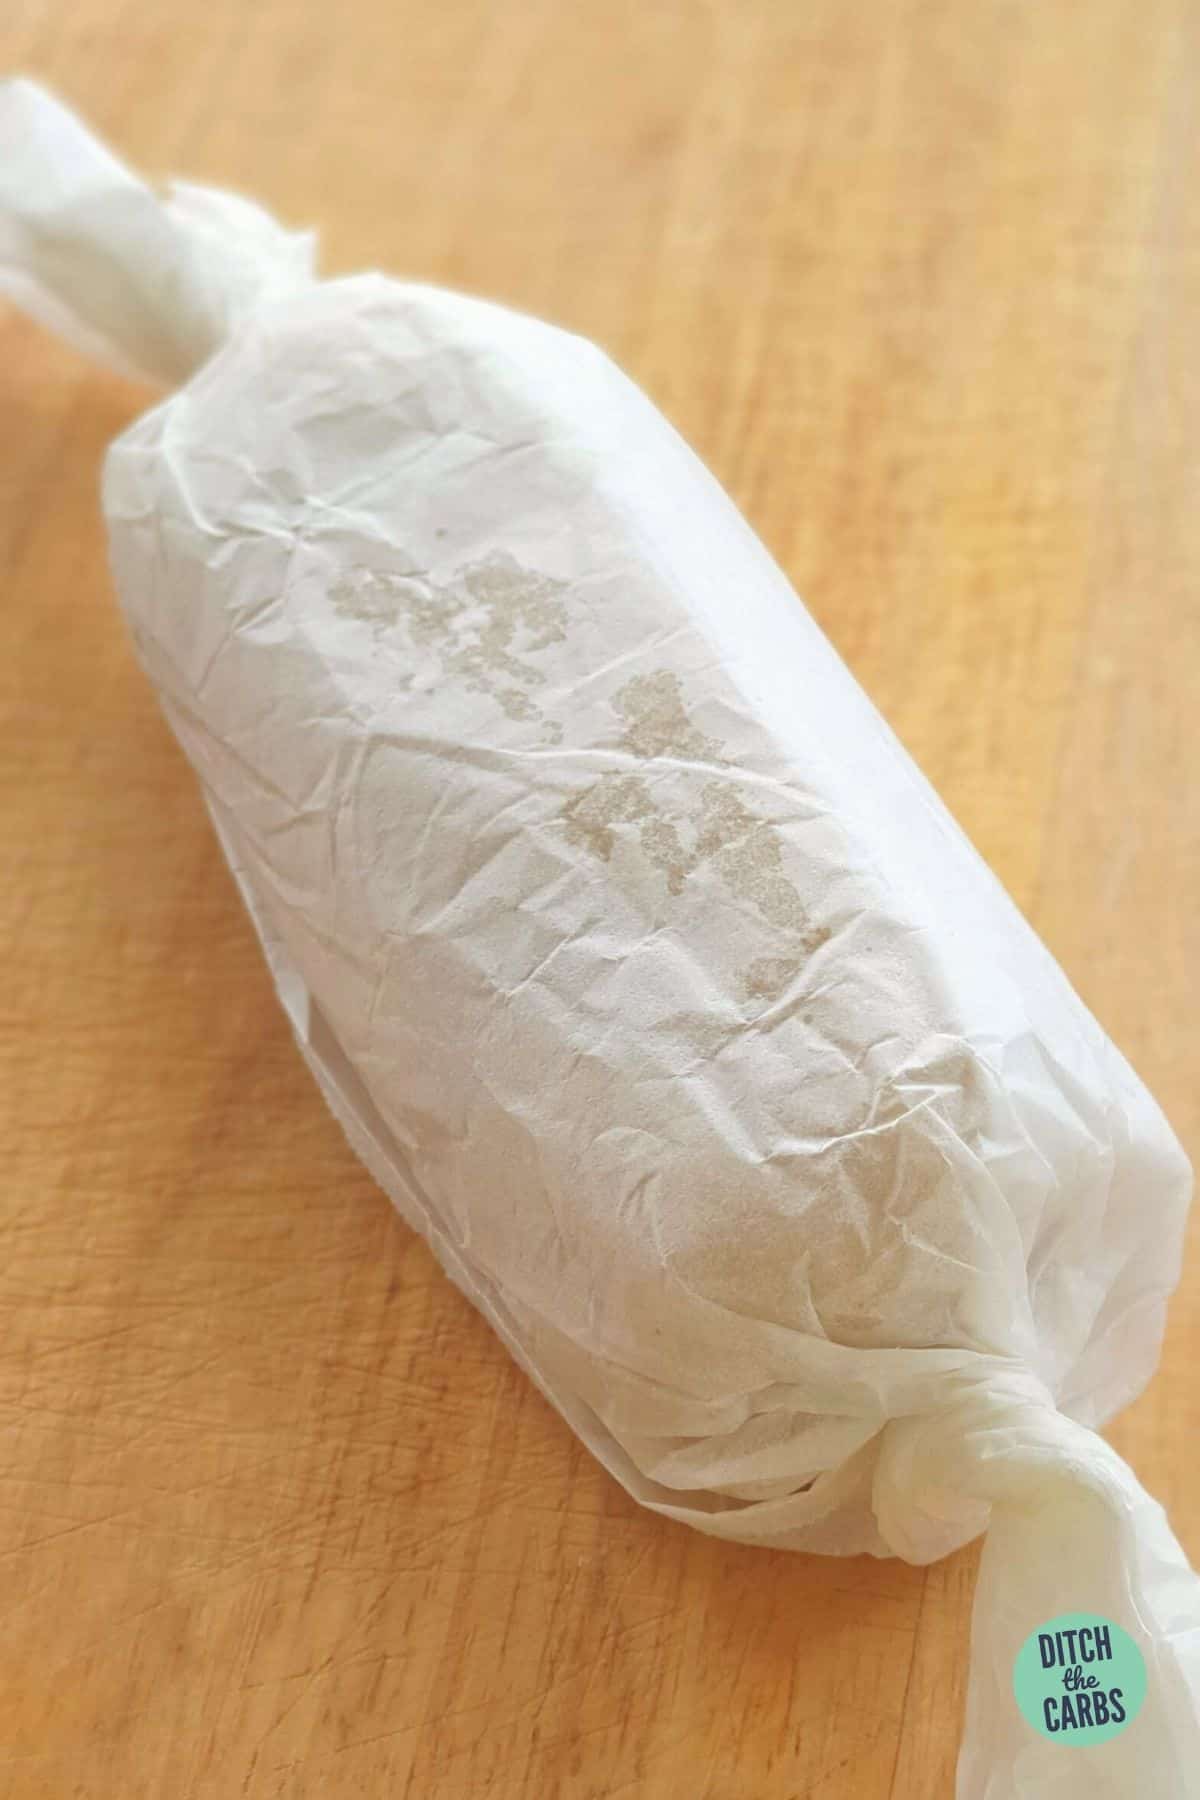 keto sugar-free marzipan rolled into a log then wrapped in baking parchment